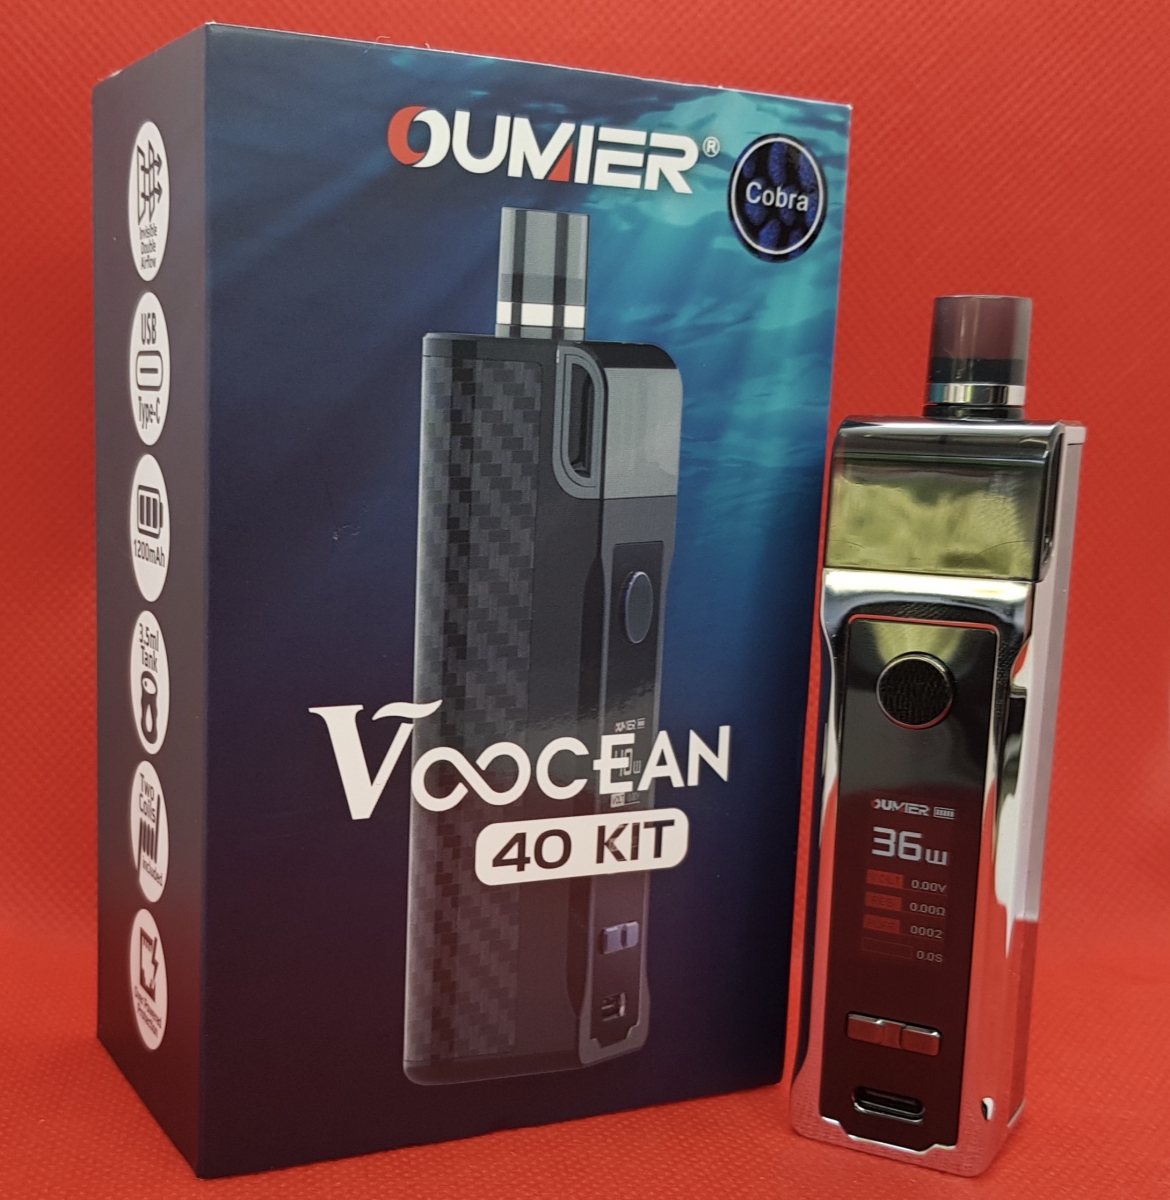 Oumier Voocean 40 kit with box